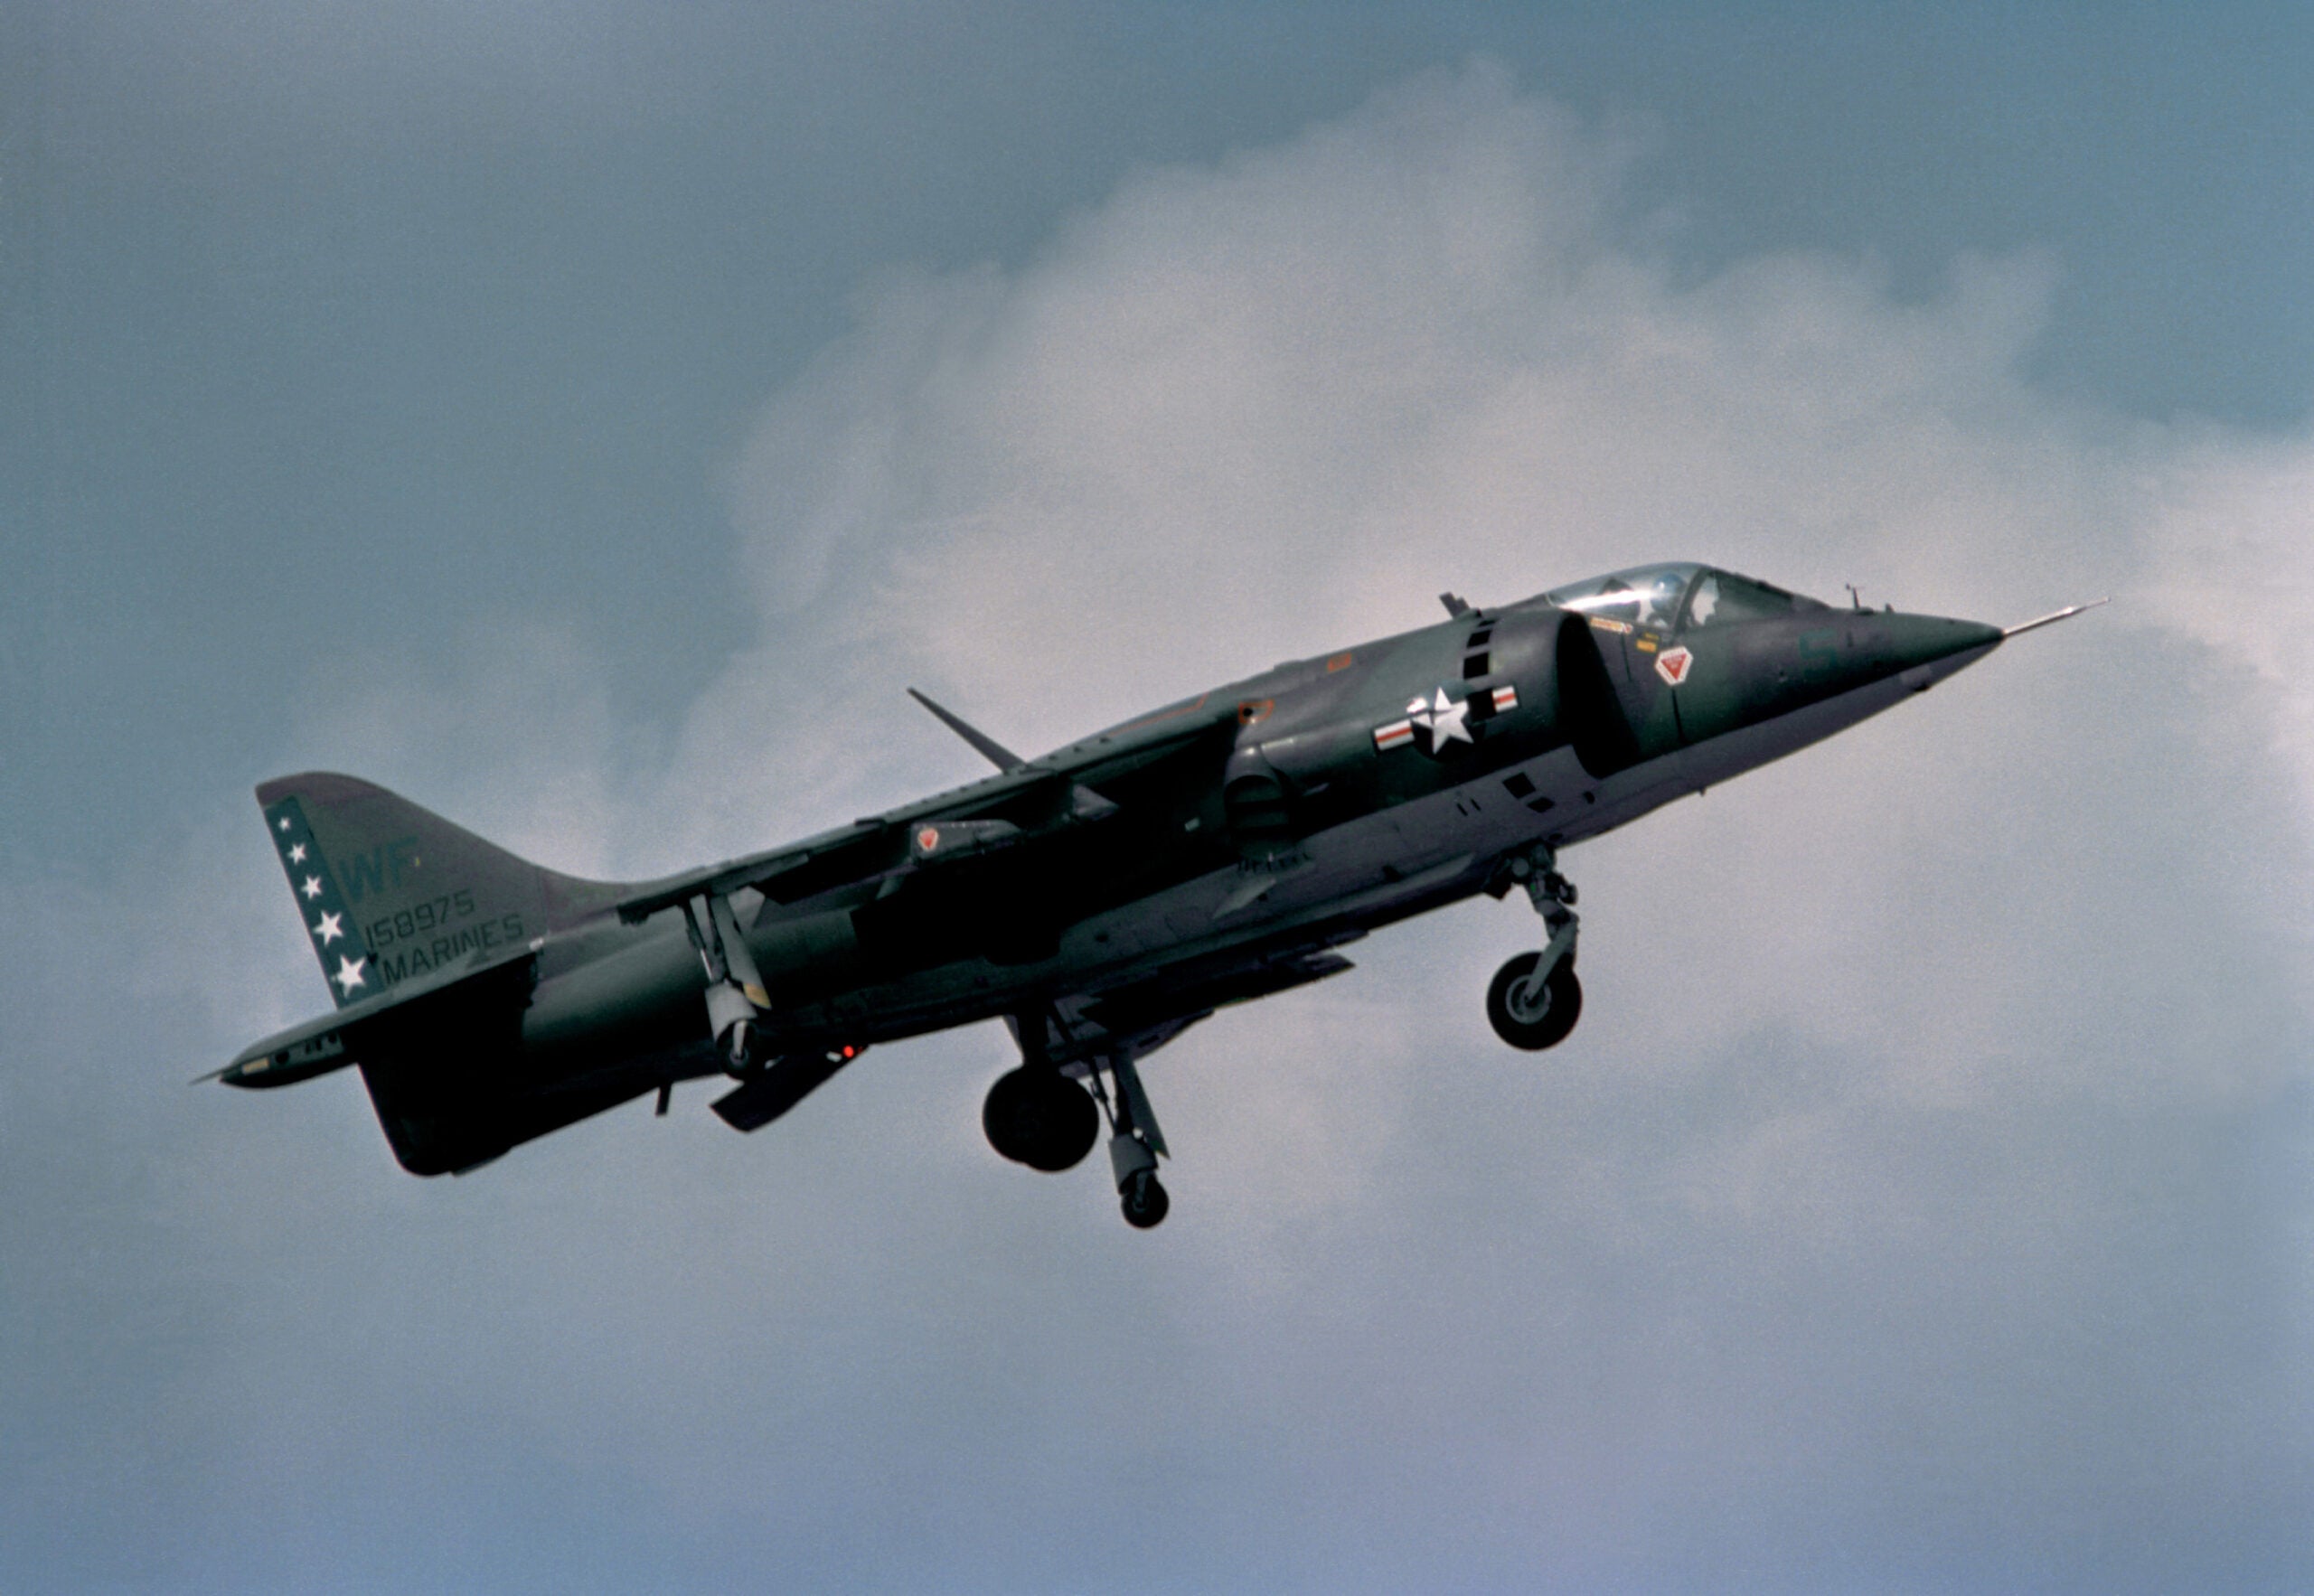 A ground-to-air right side view of a Marine AV-8A Harrier aircraft preparing to land.  The Harrier is from Marine Light Attack Squadron 513 (VMLA-513).